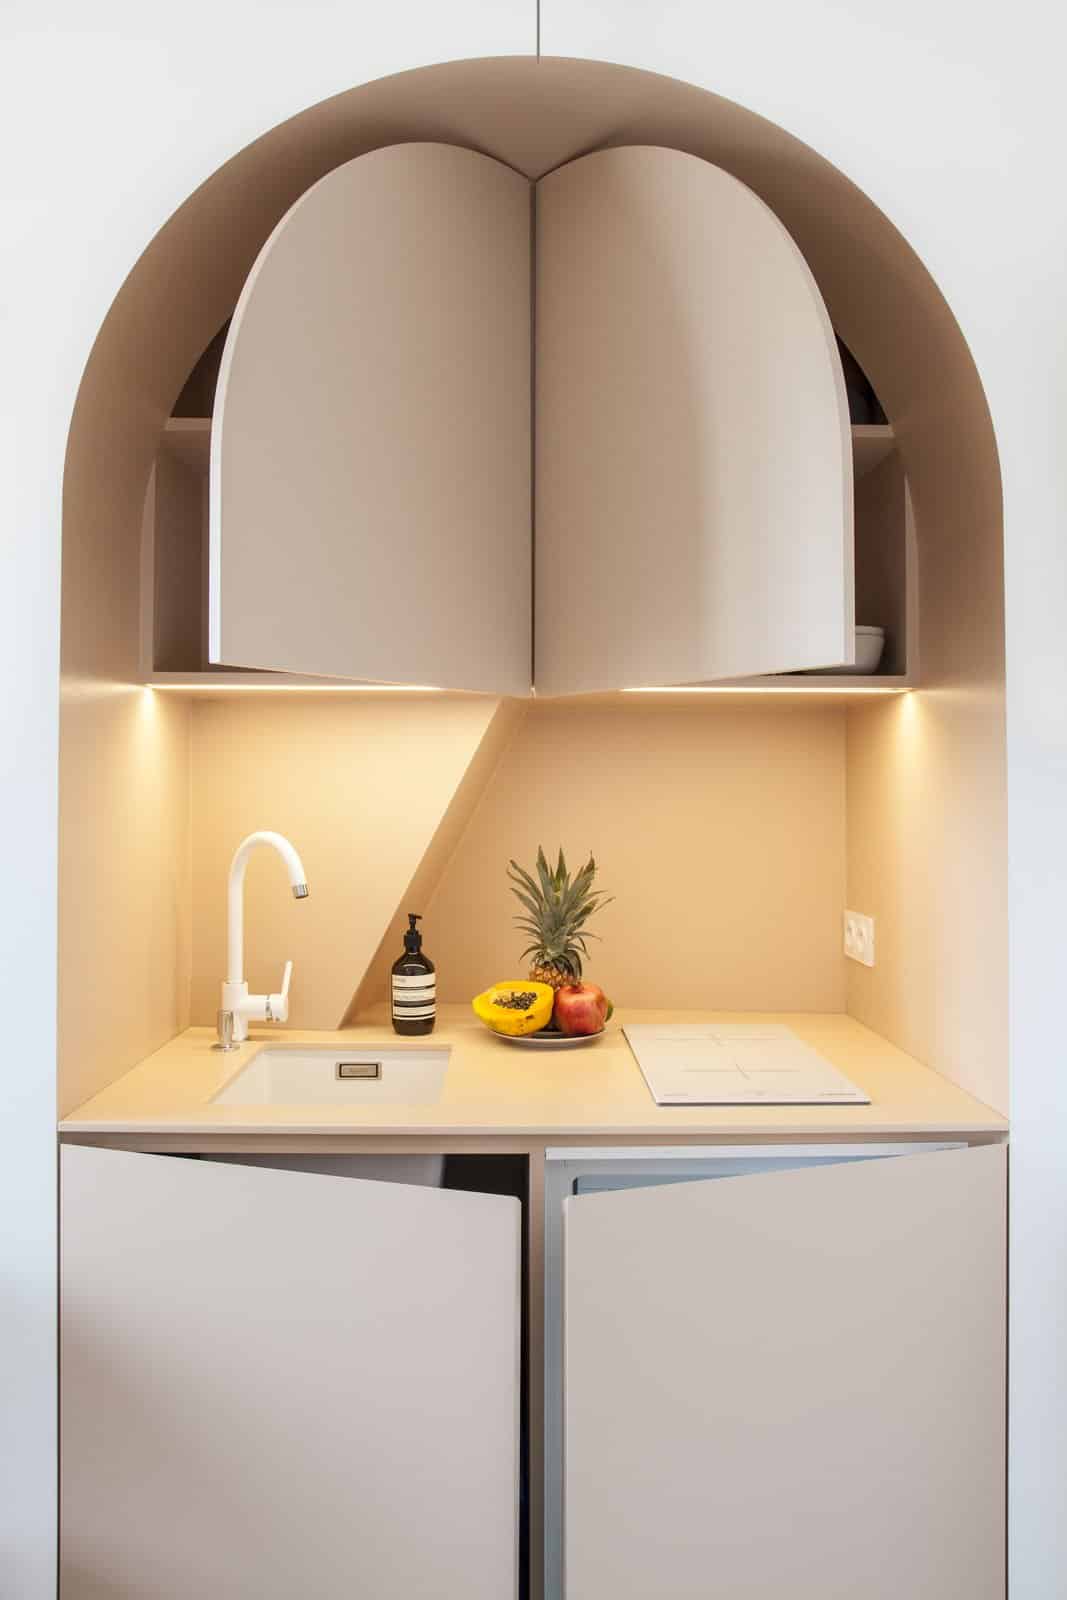 Pop out doors reveal storage space and a tiny refrigerator1